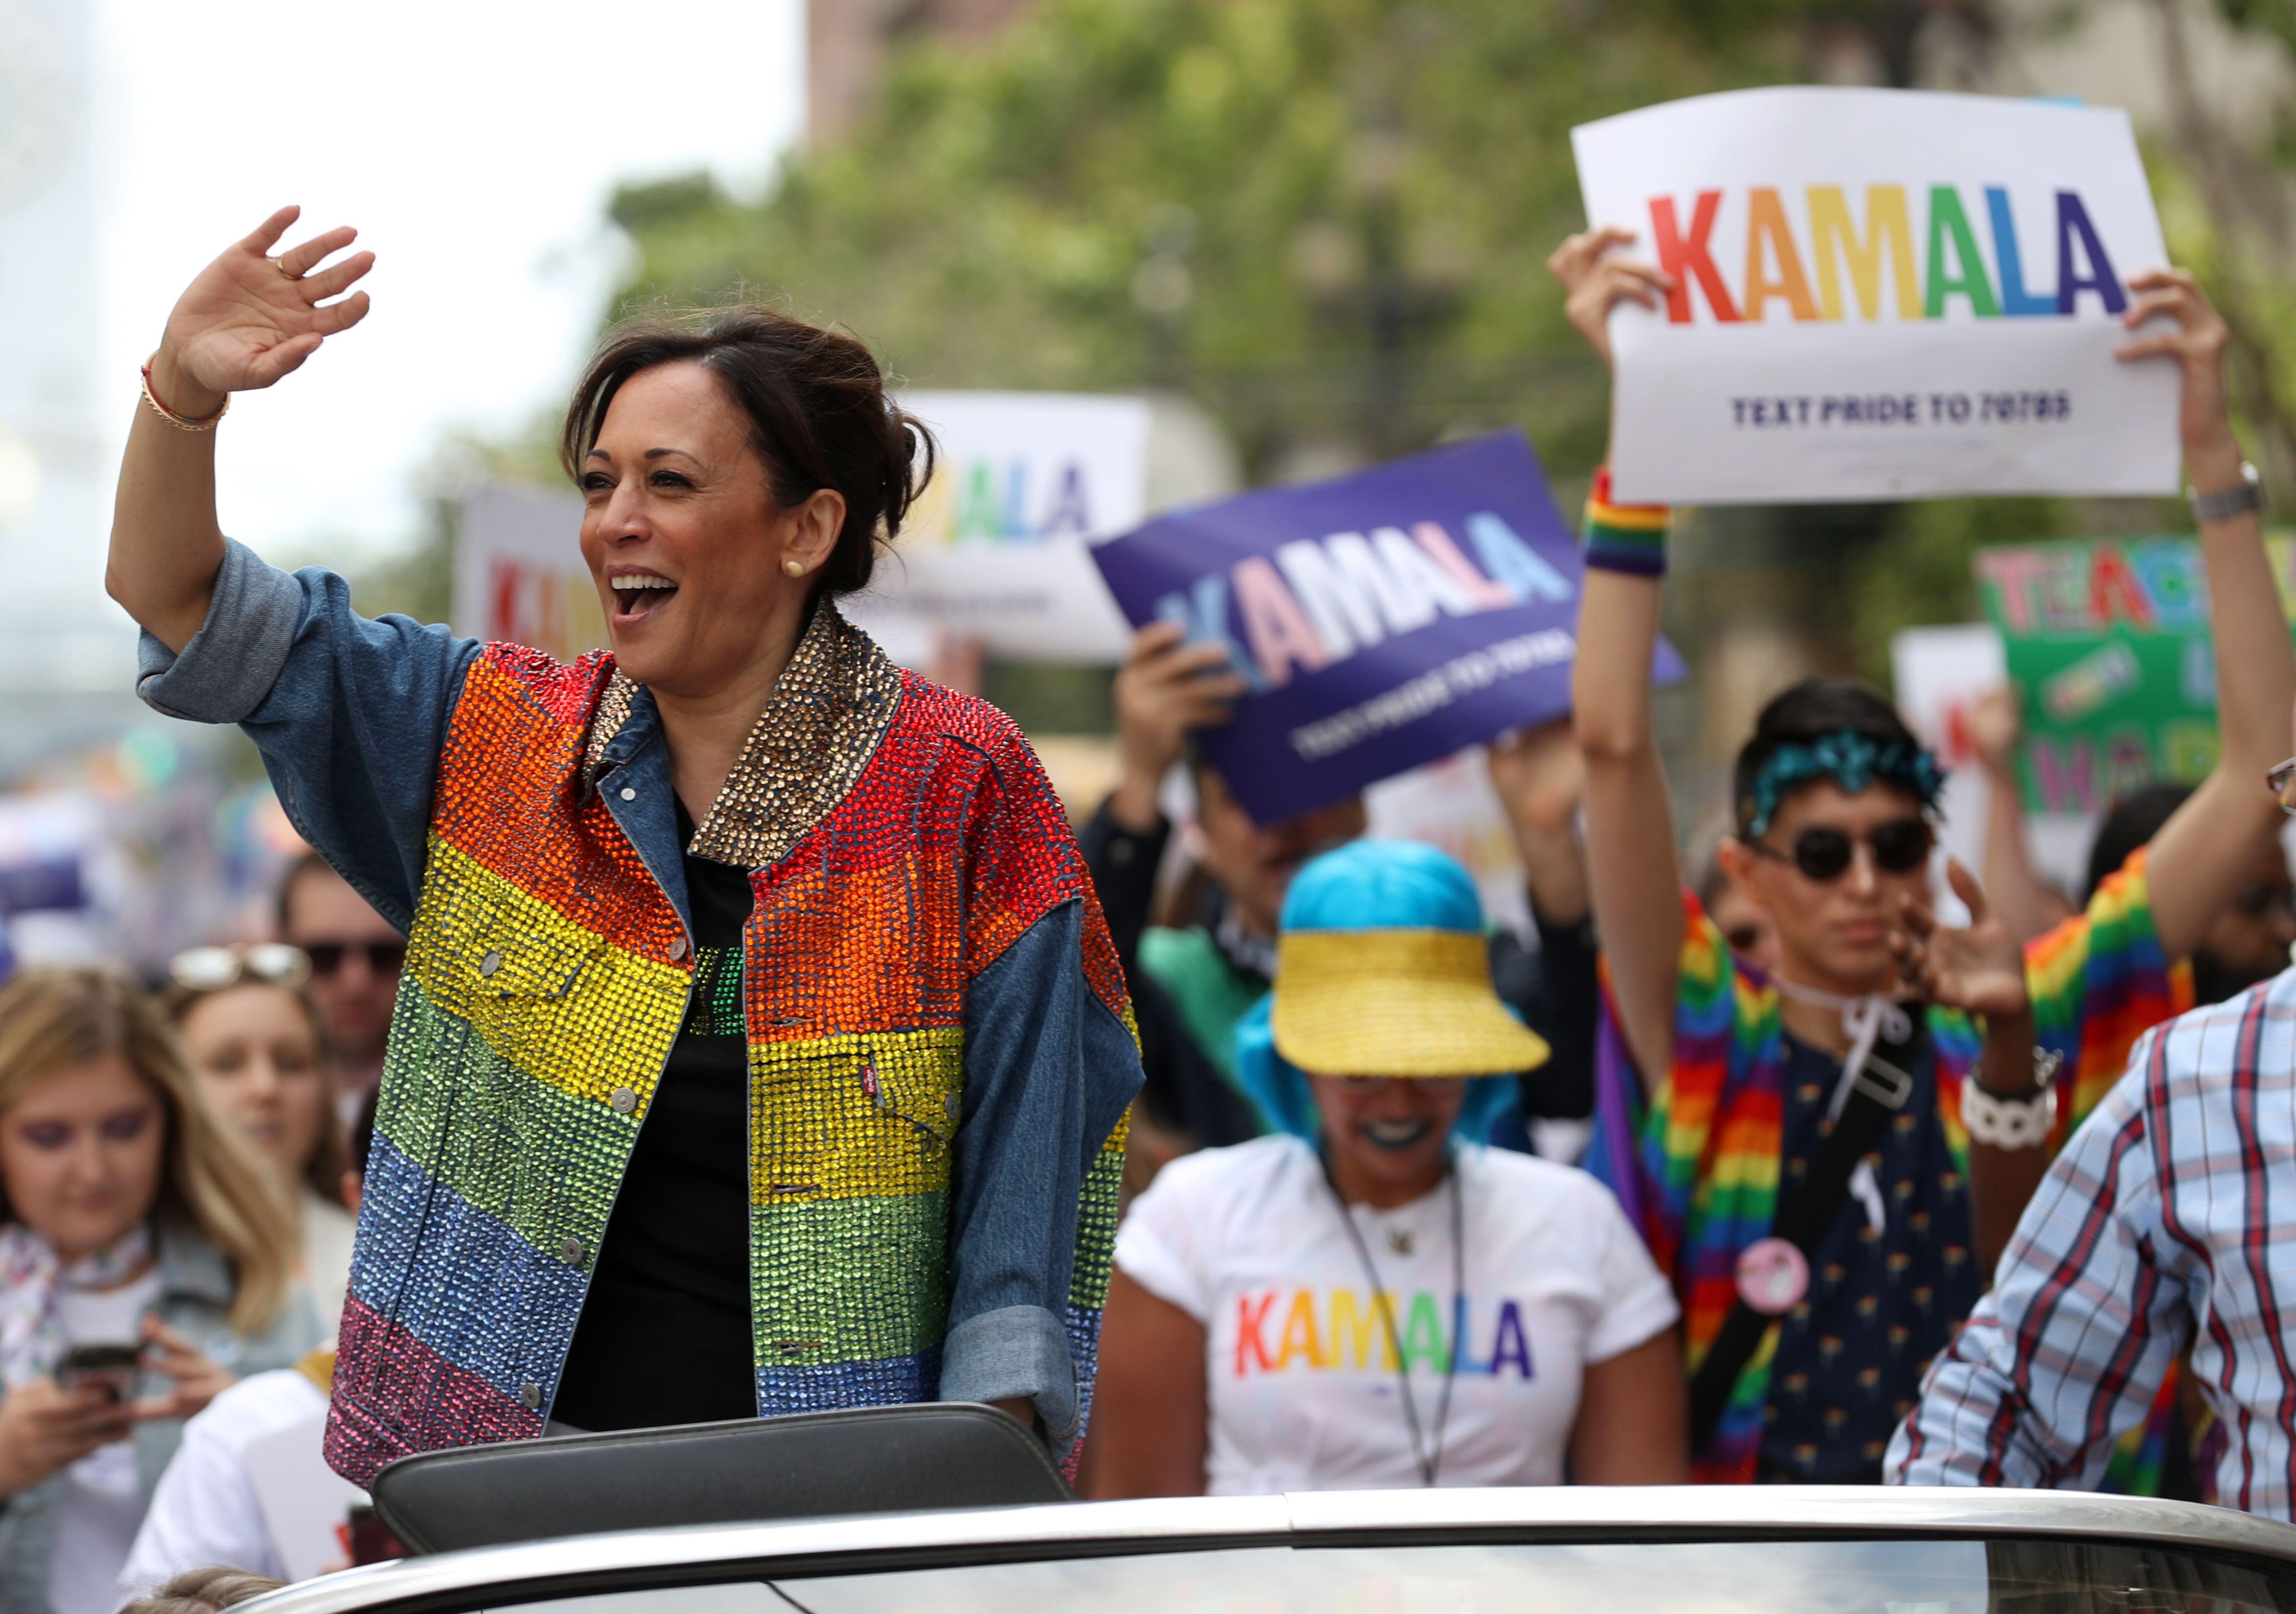 SAN FRANCISCO, CALIFORNIA - JUNE 30: Democratic presidential candidate U.S. Sen. Kamala Harris (D-CA) waves to the crowd as she rides in a car during the SF Pride Parade on June 30, 2019 in San Francisco, California. Sen. Harris spent the weekend in the San Francisco Bay Area where she attended a fundraiser and the annual SF Pride Parade.   Justin Sullivan/Getty Images/AFP
== FOR NEWSPAPERS, INTERNET, TELCOS & TELEVISION USE ONLY ==